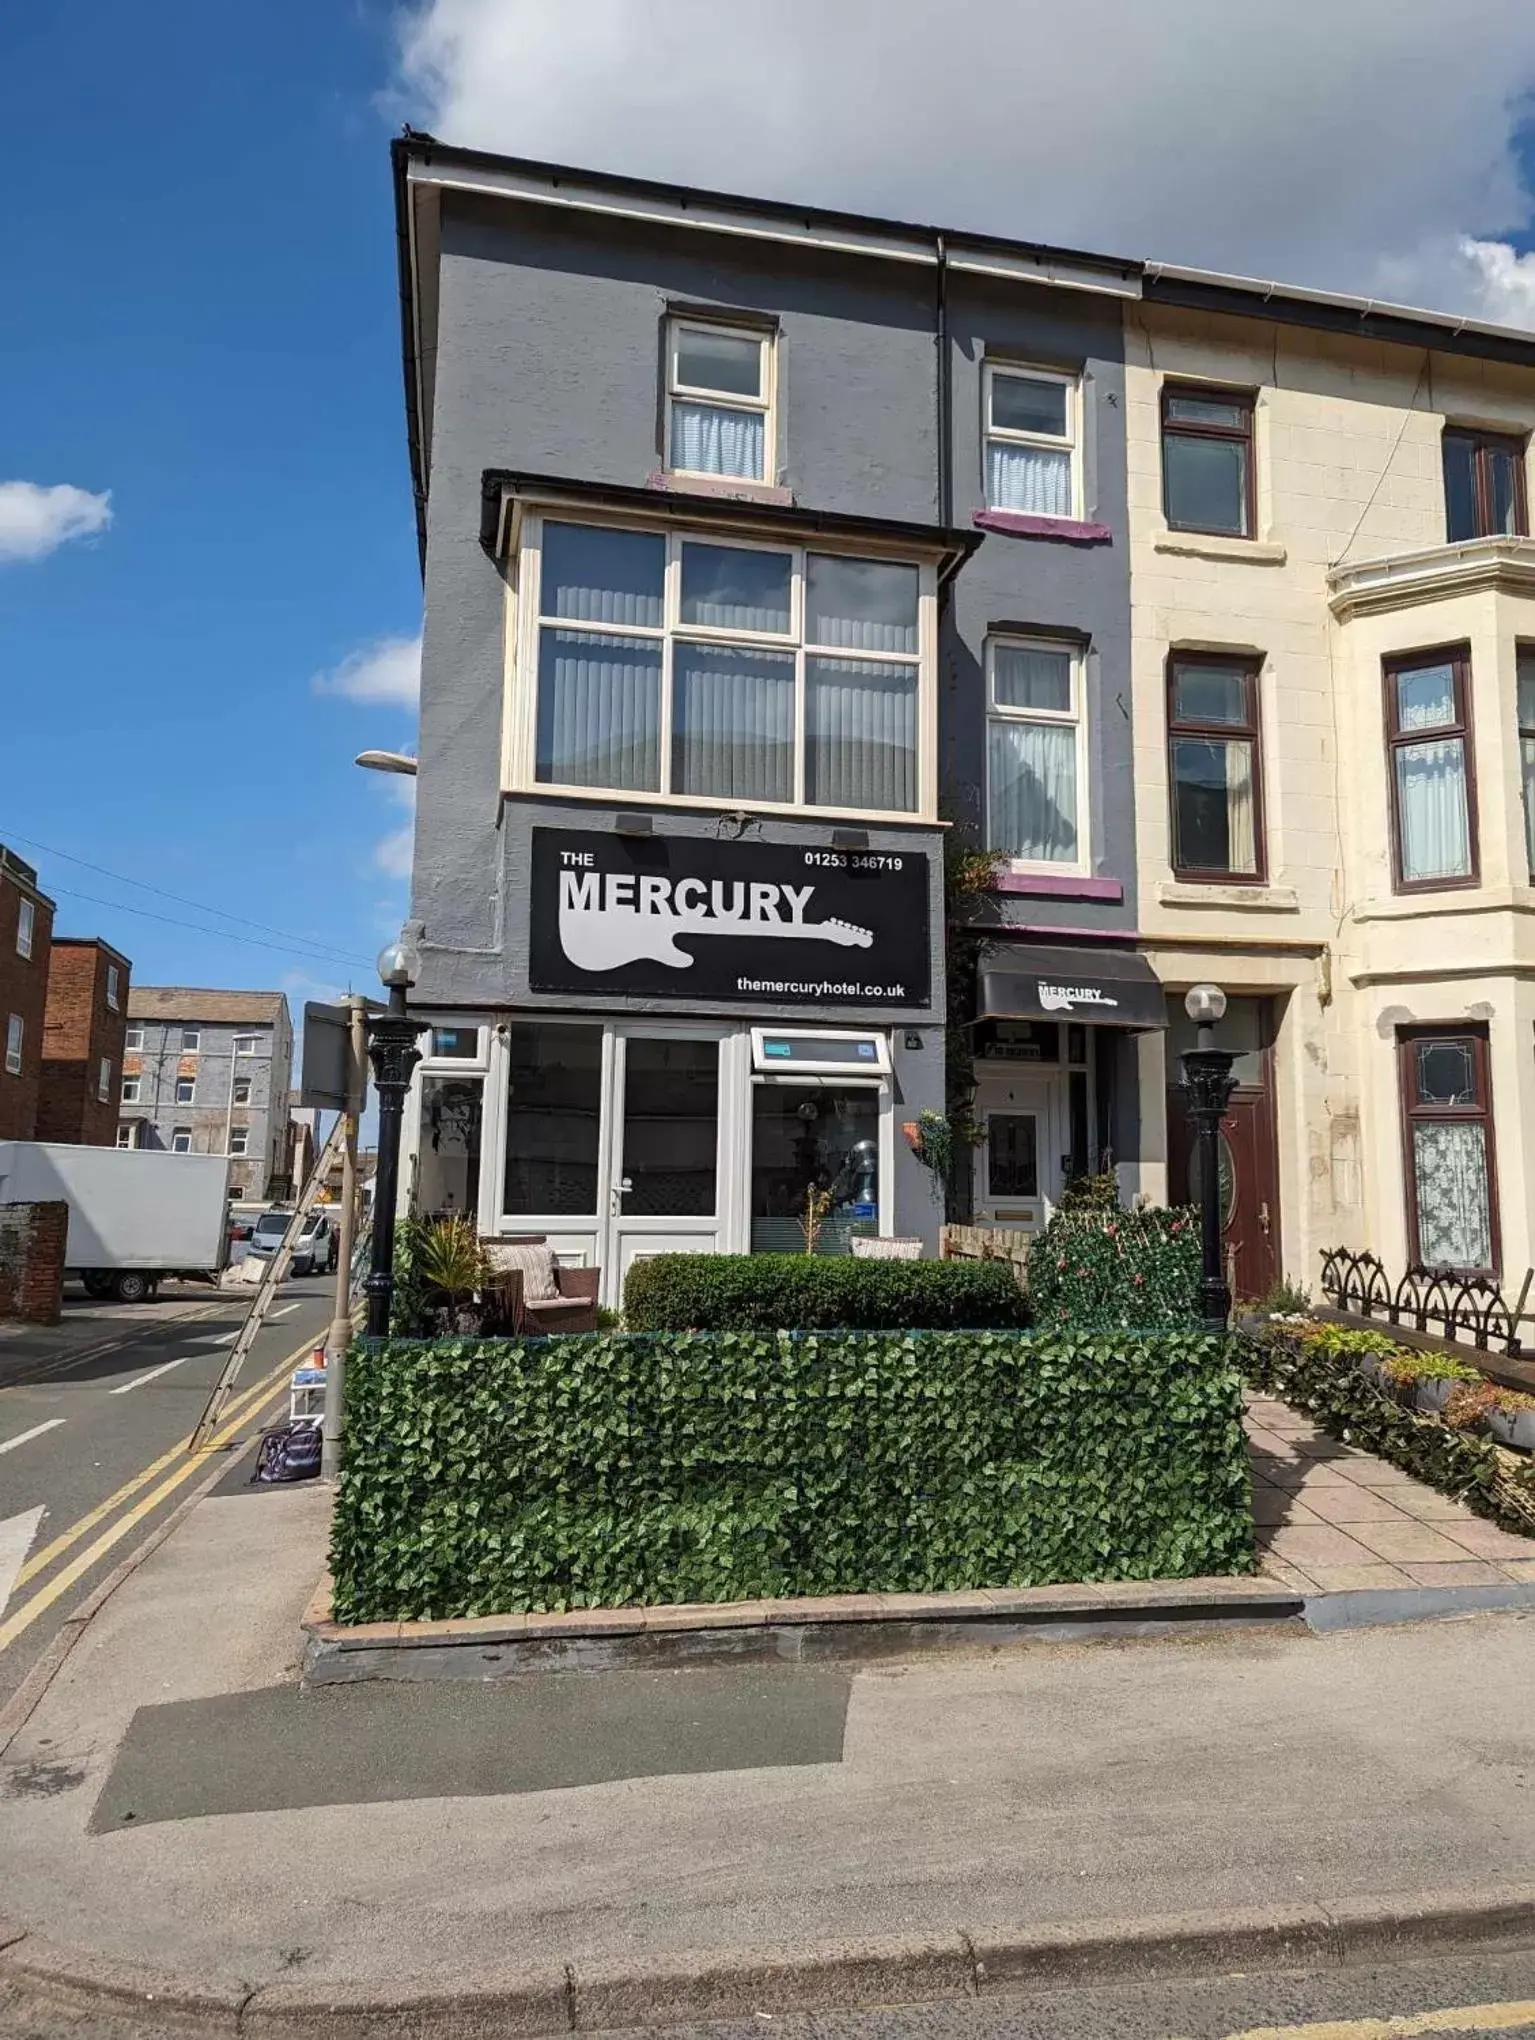 Property Building in The Mercury, Blackpool - over 21's only